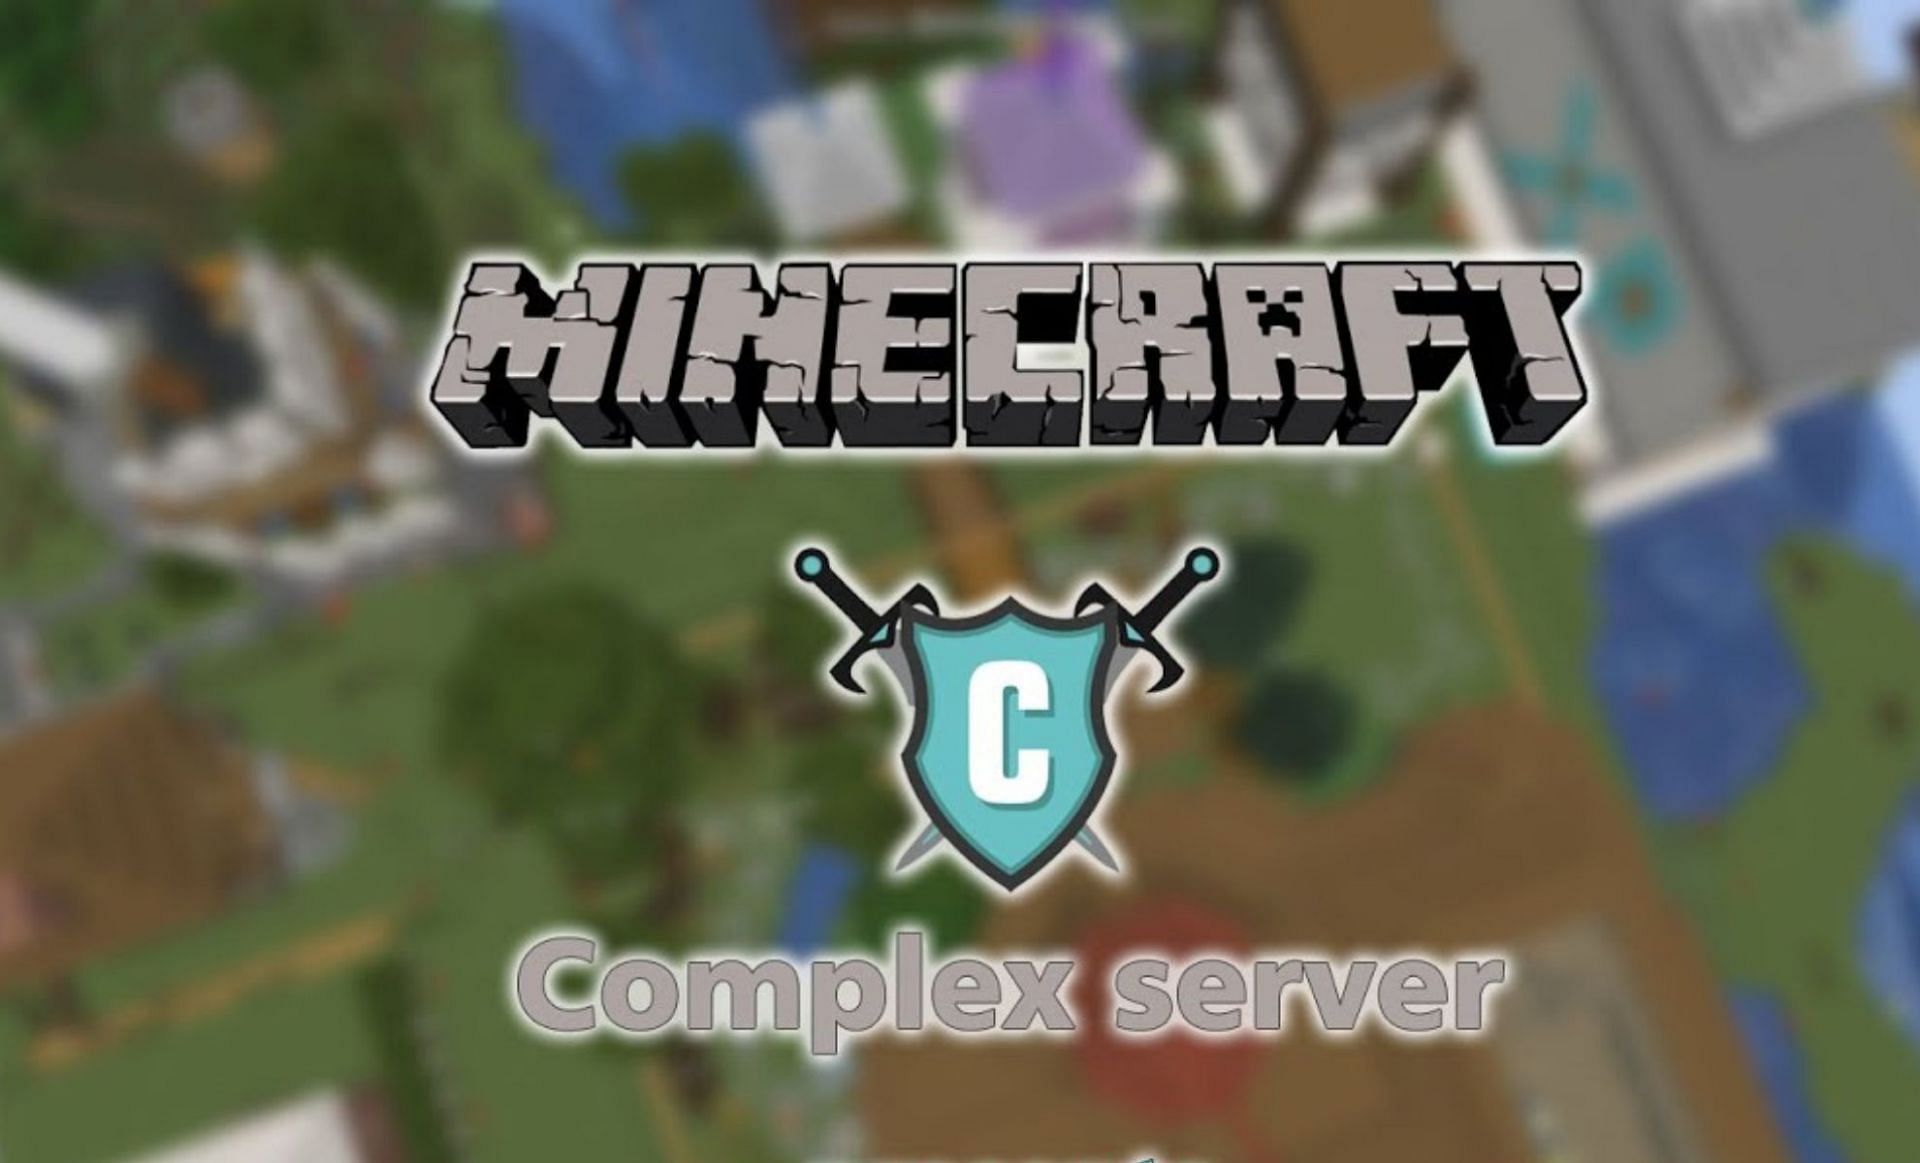 One of the top Survival servers (Image via EbiEater on YouTube)